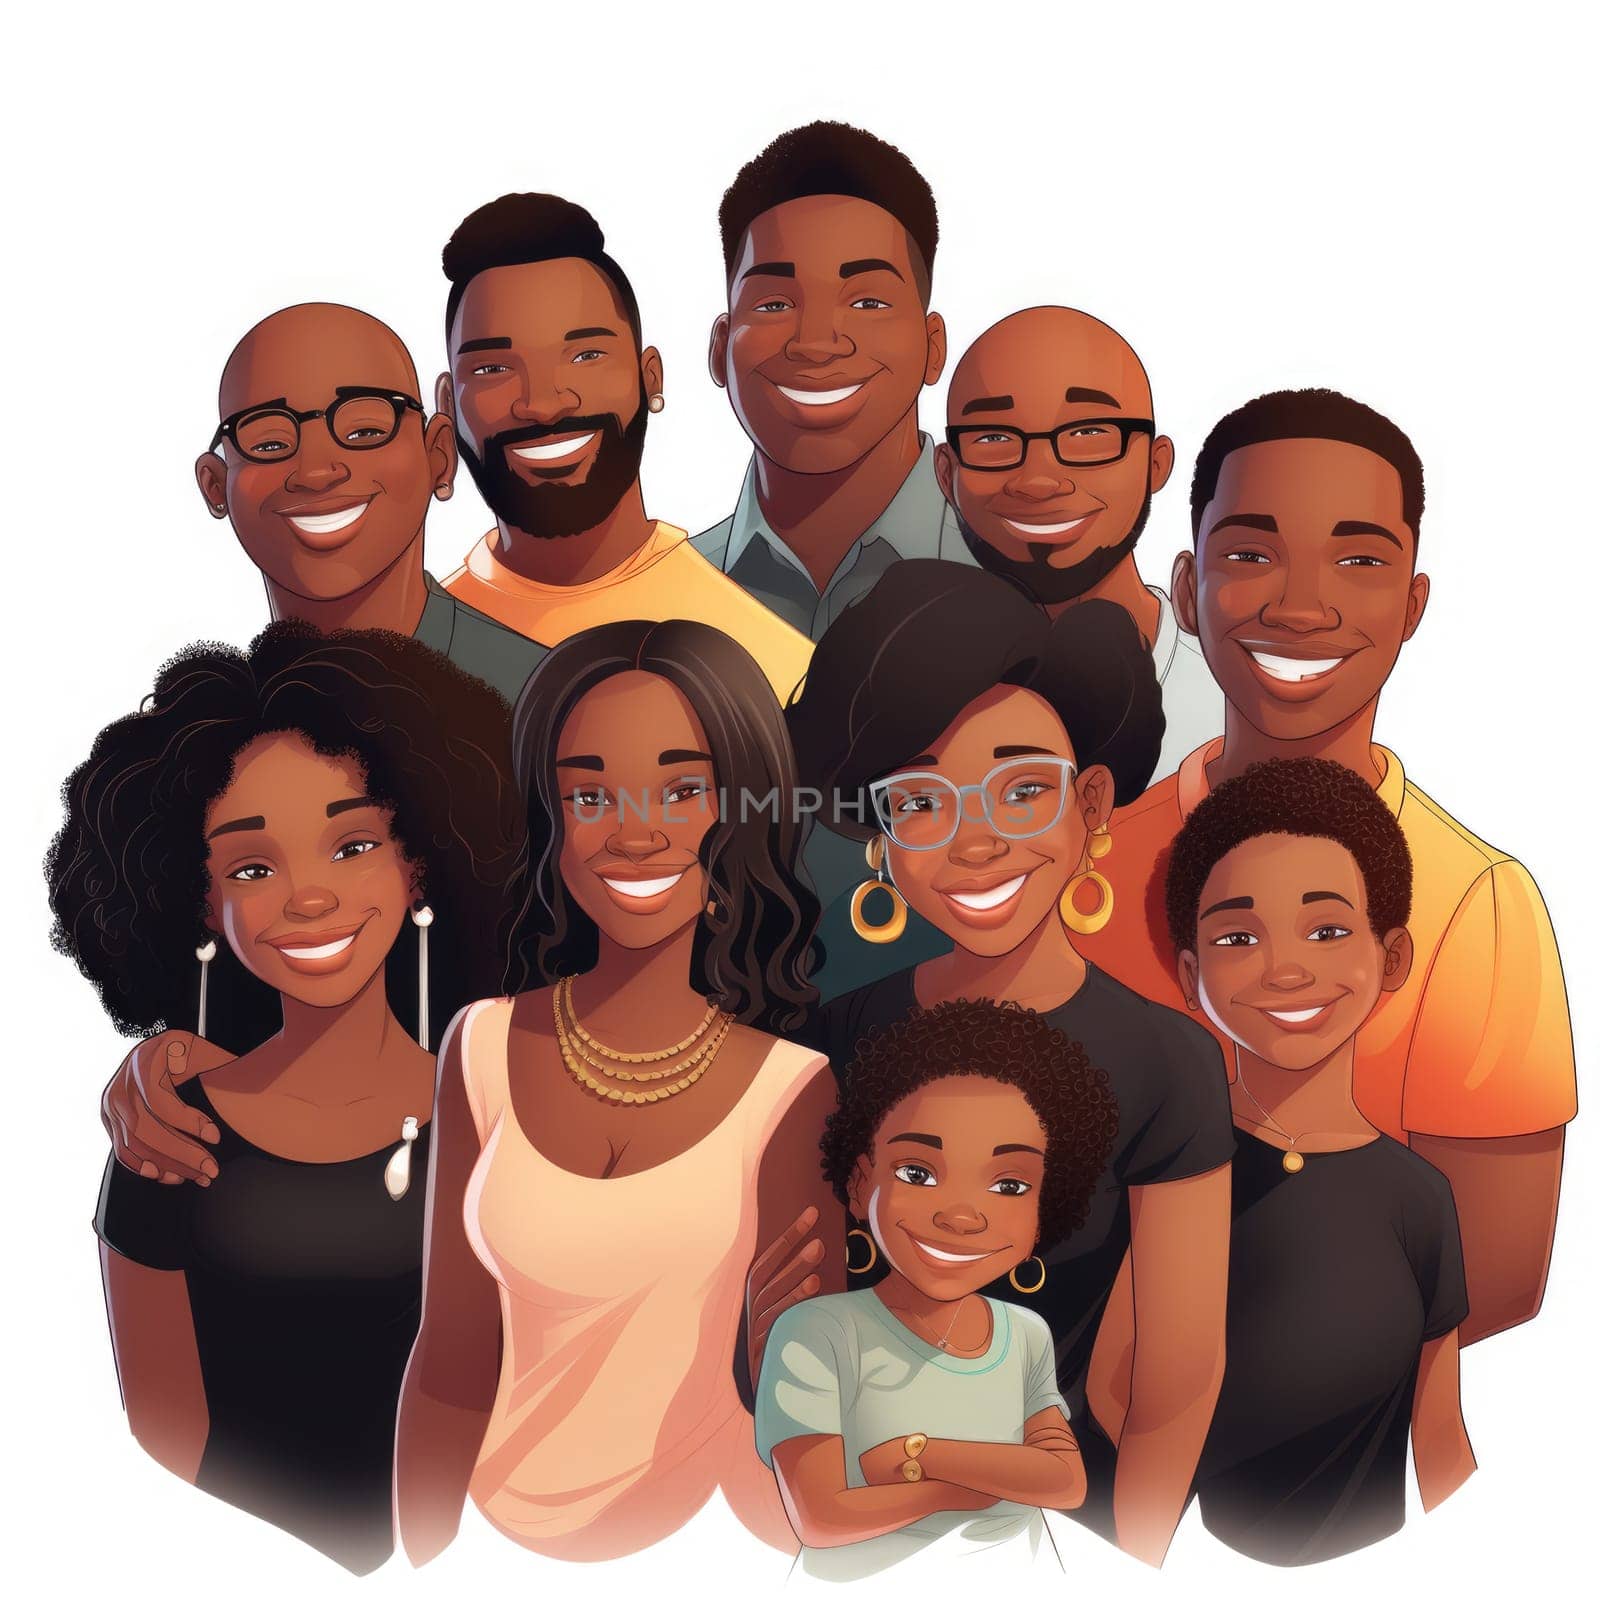 Black history month. Multi-Generation African American Family In sketch style on white background, AI Generated